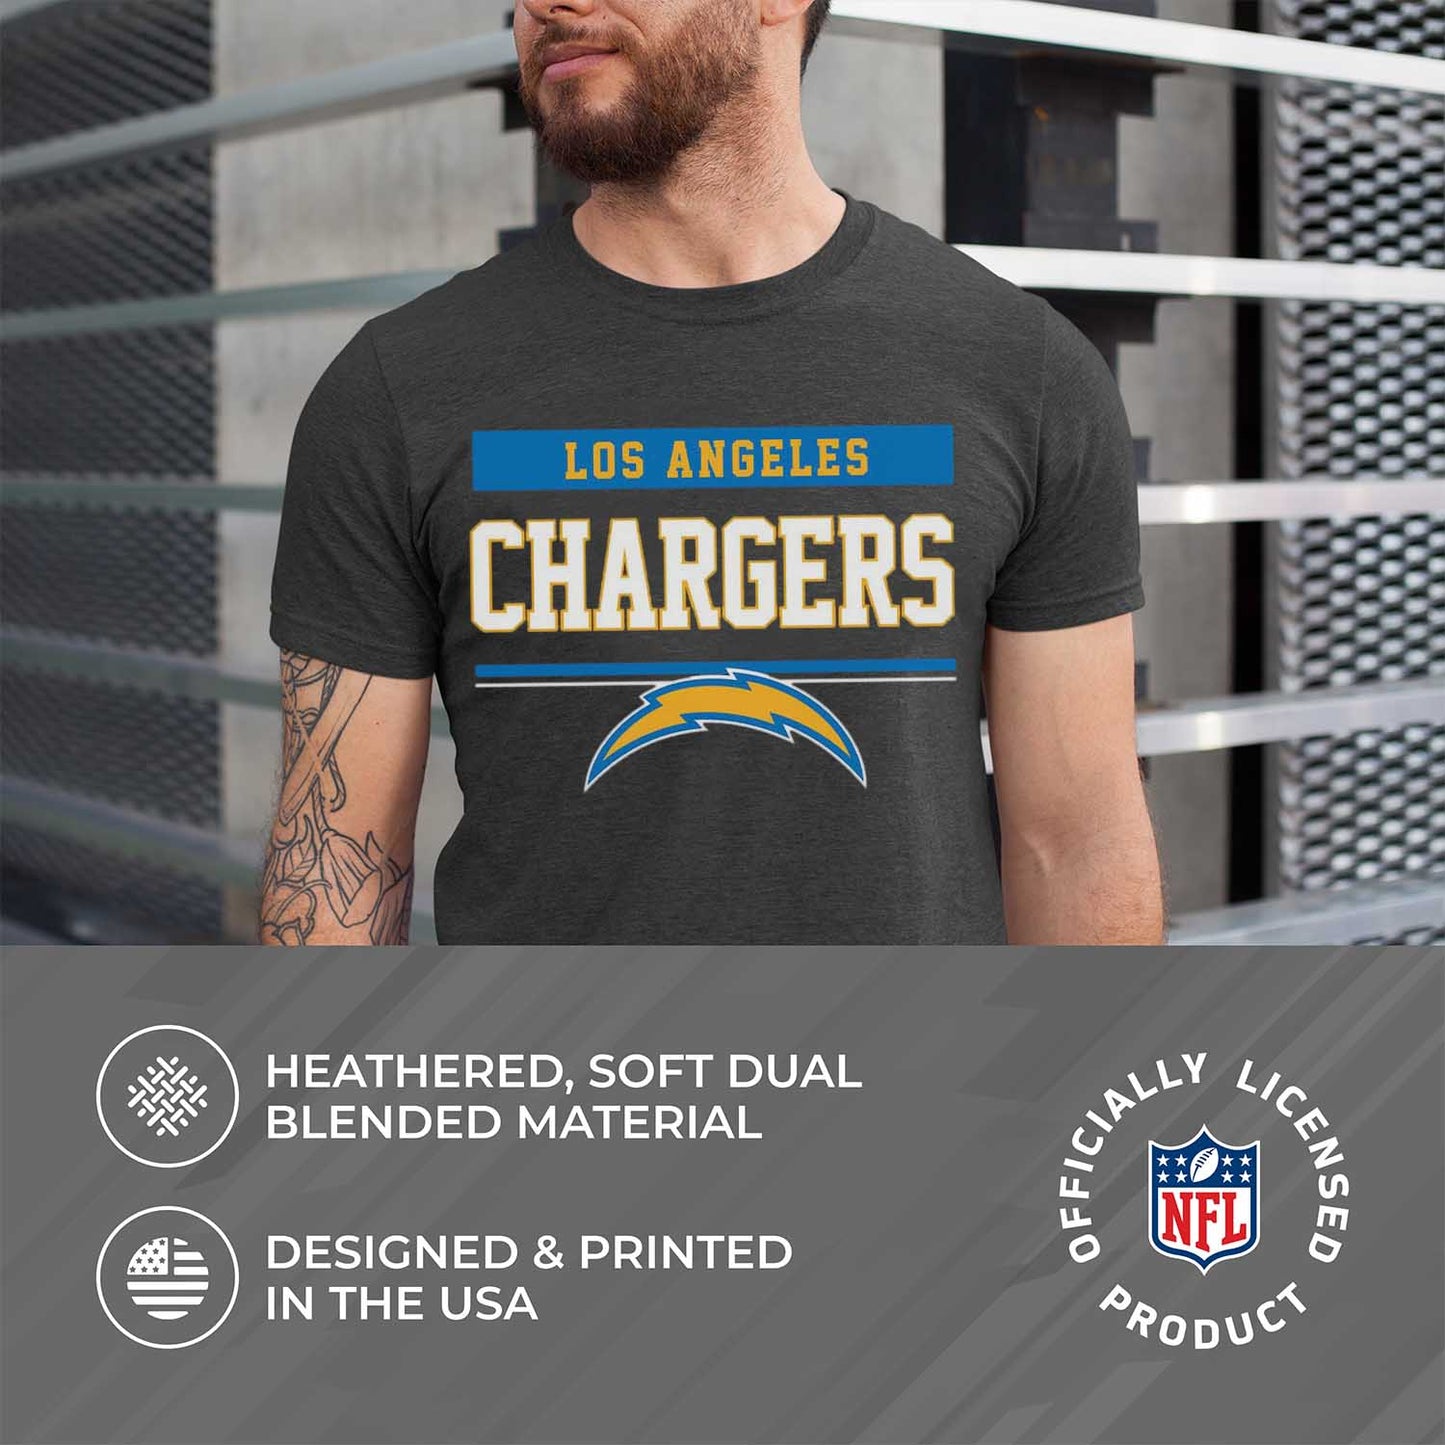 Los Angeles Chargers NFL Adult Team Block Tagless T-Shirt - Charcoal